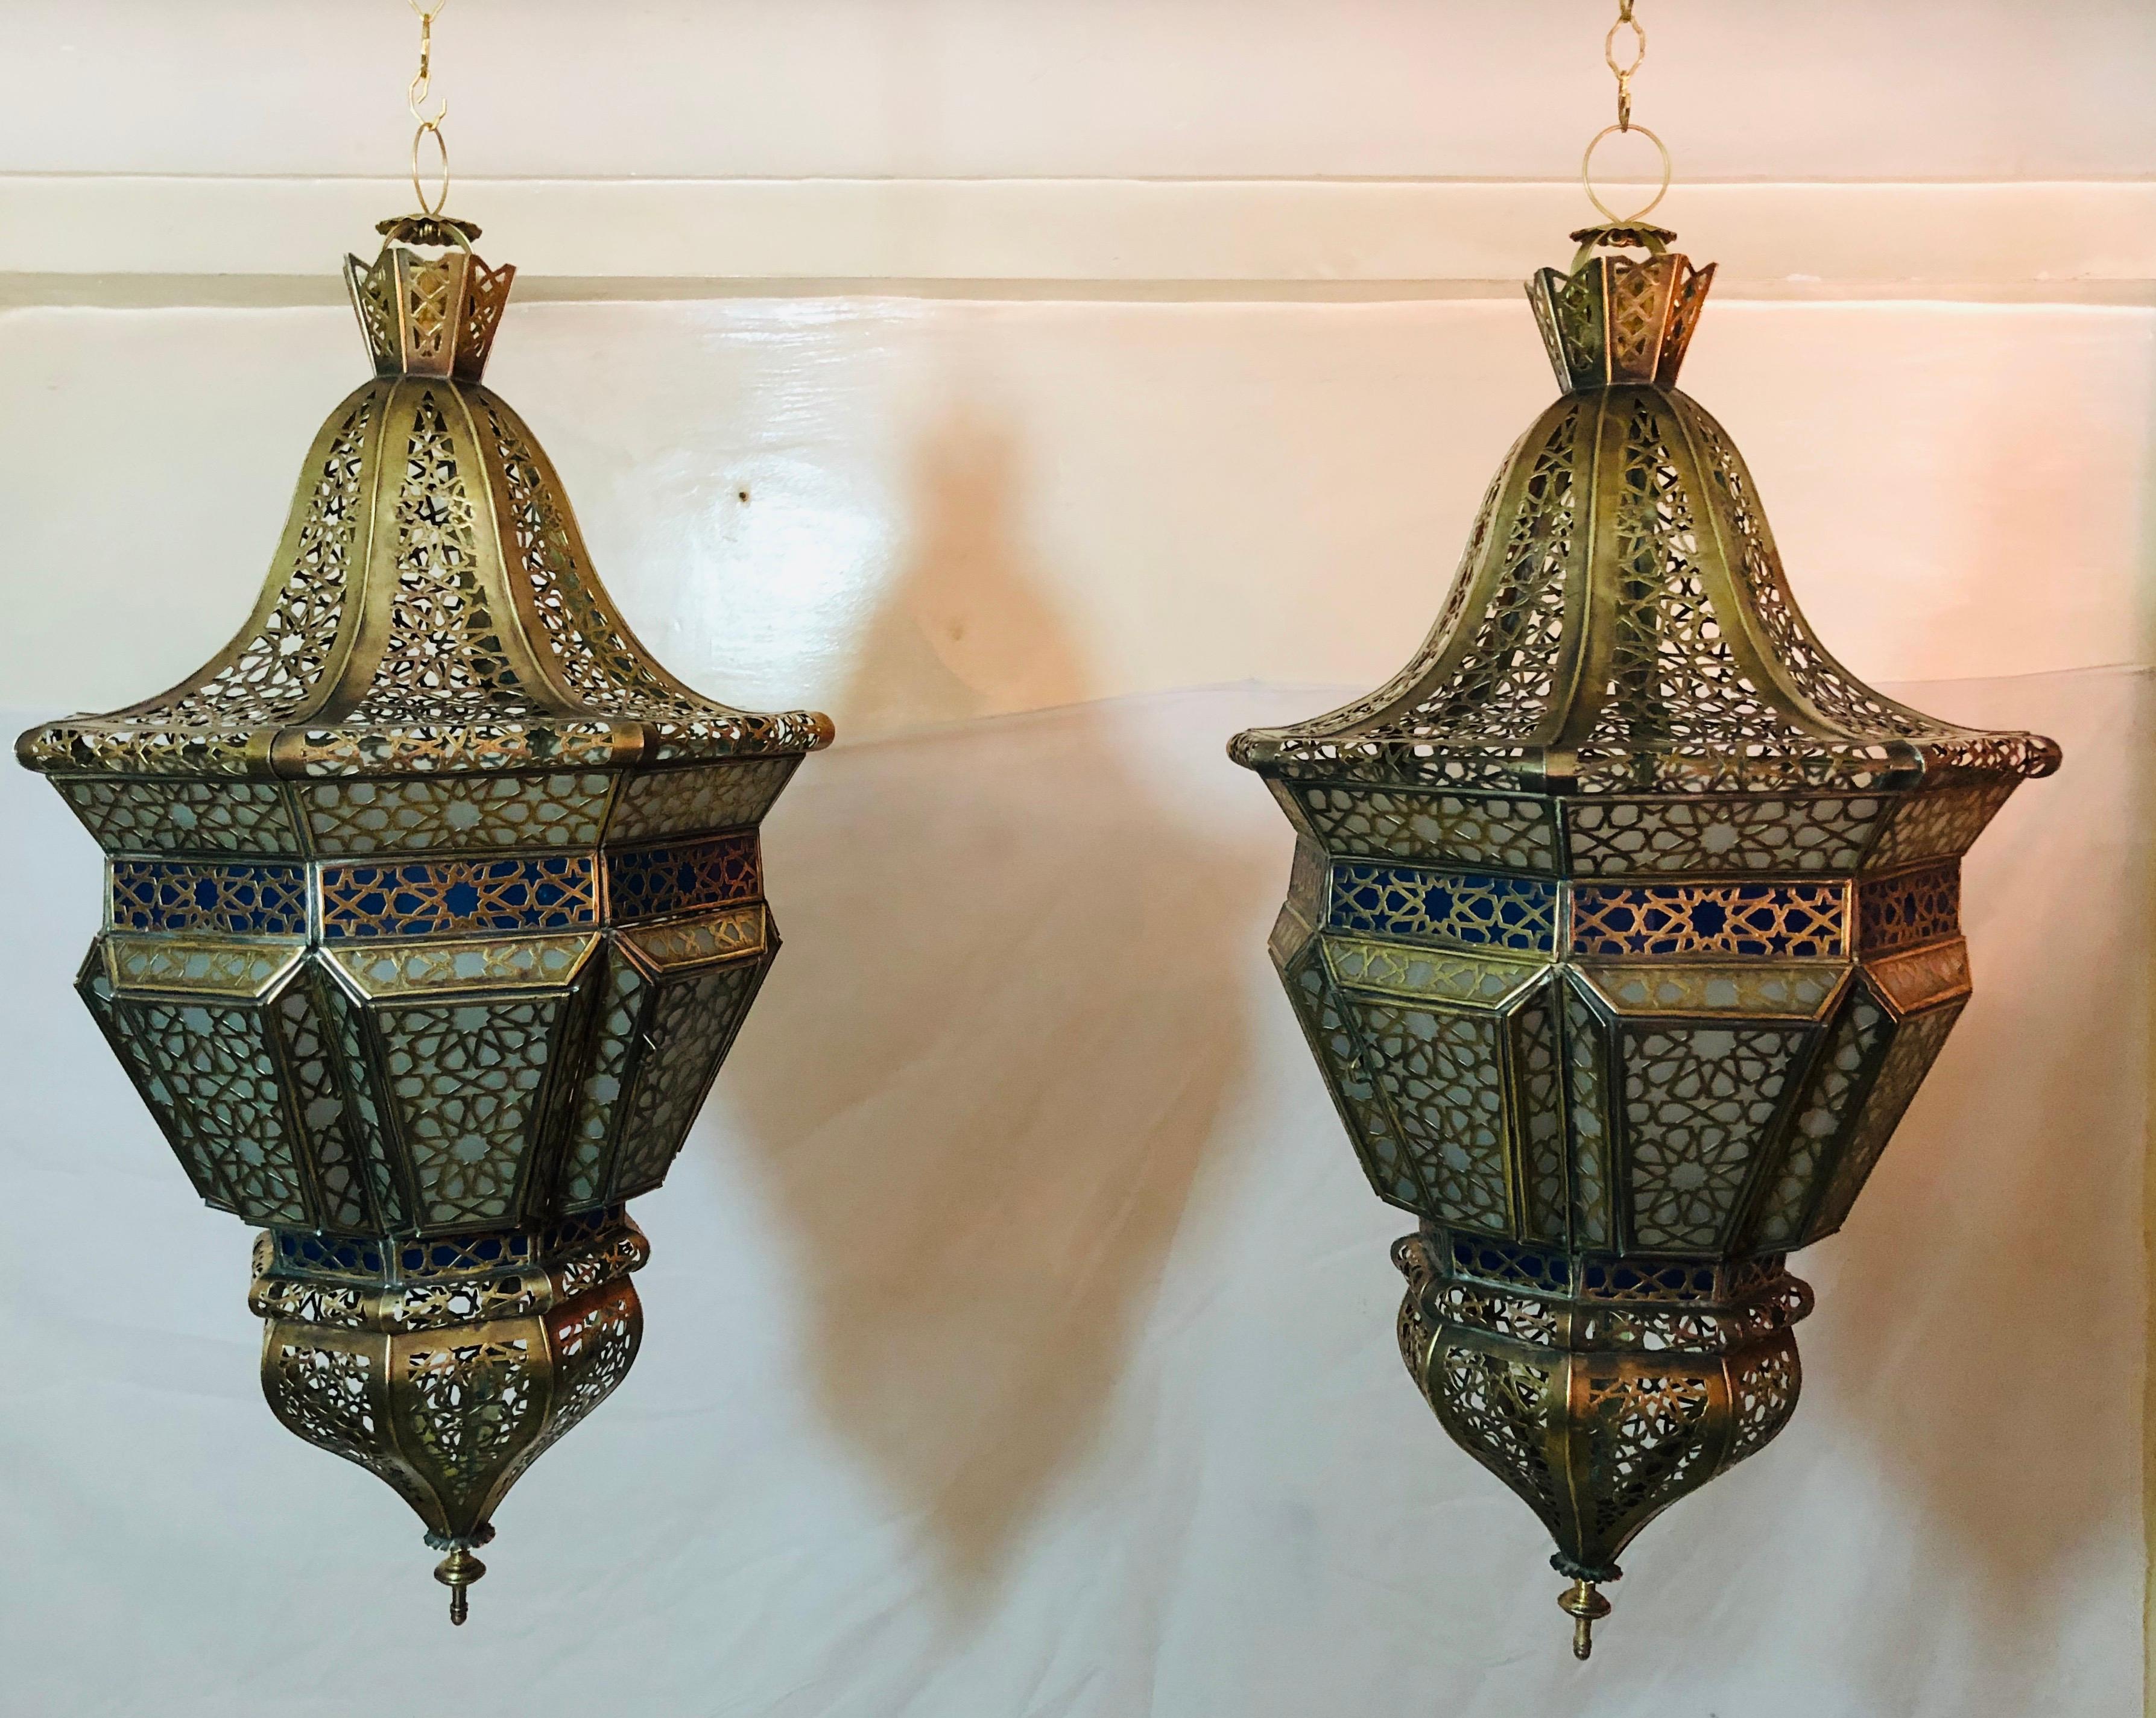 Add an exotic and stylish vibe to your living space with this beautiful pair of handmade Moroccan lanterns or chandeliers. The chandelier is made of fine antiqued gold brass, sanded glass in white and blue and features an intricate filigree